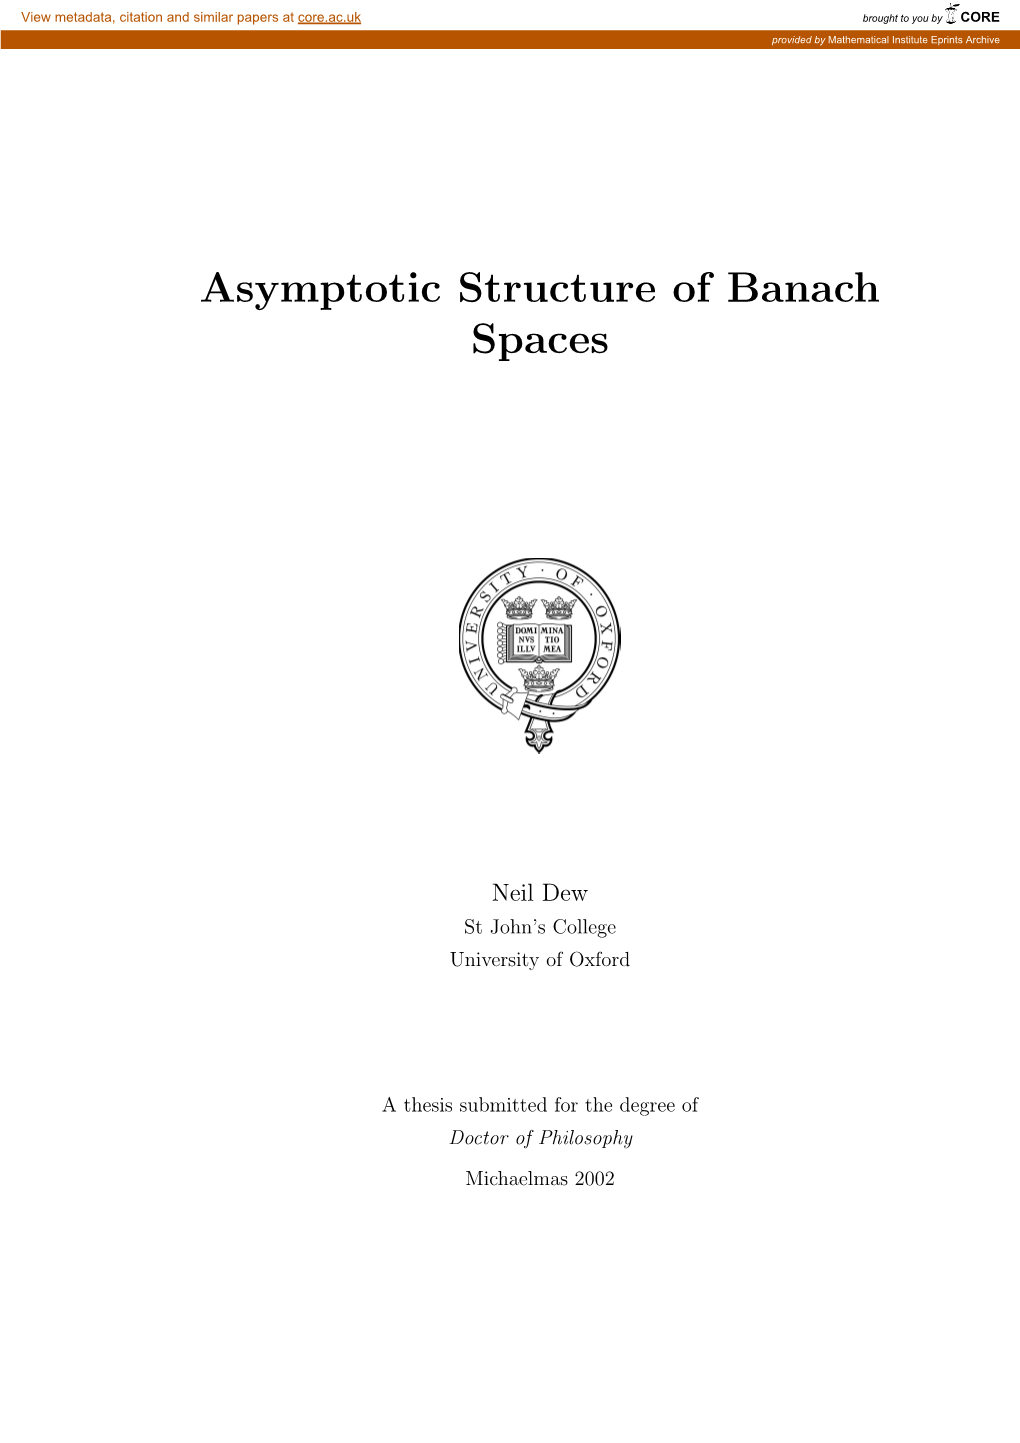 Asymptotic Structure of Banach Spaces